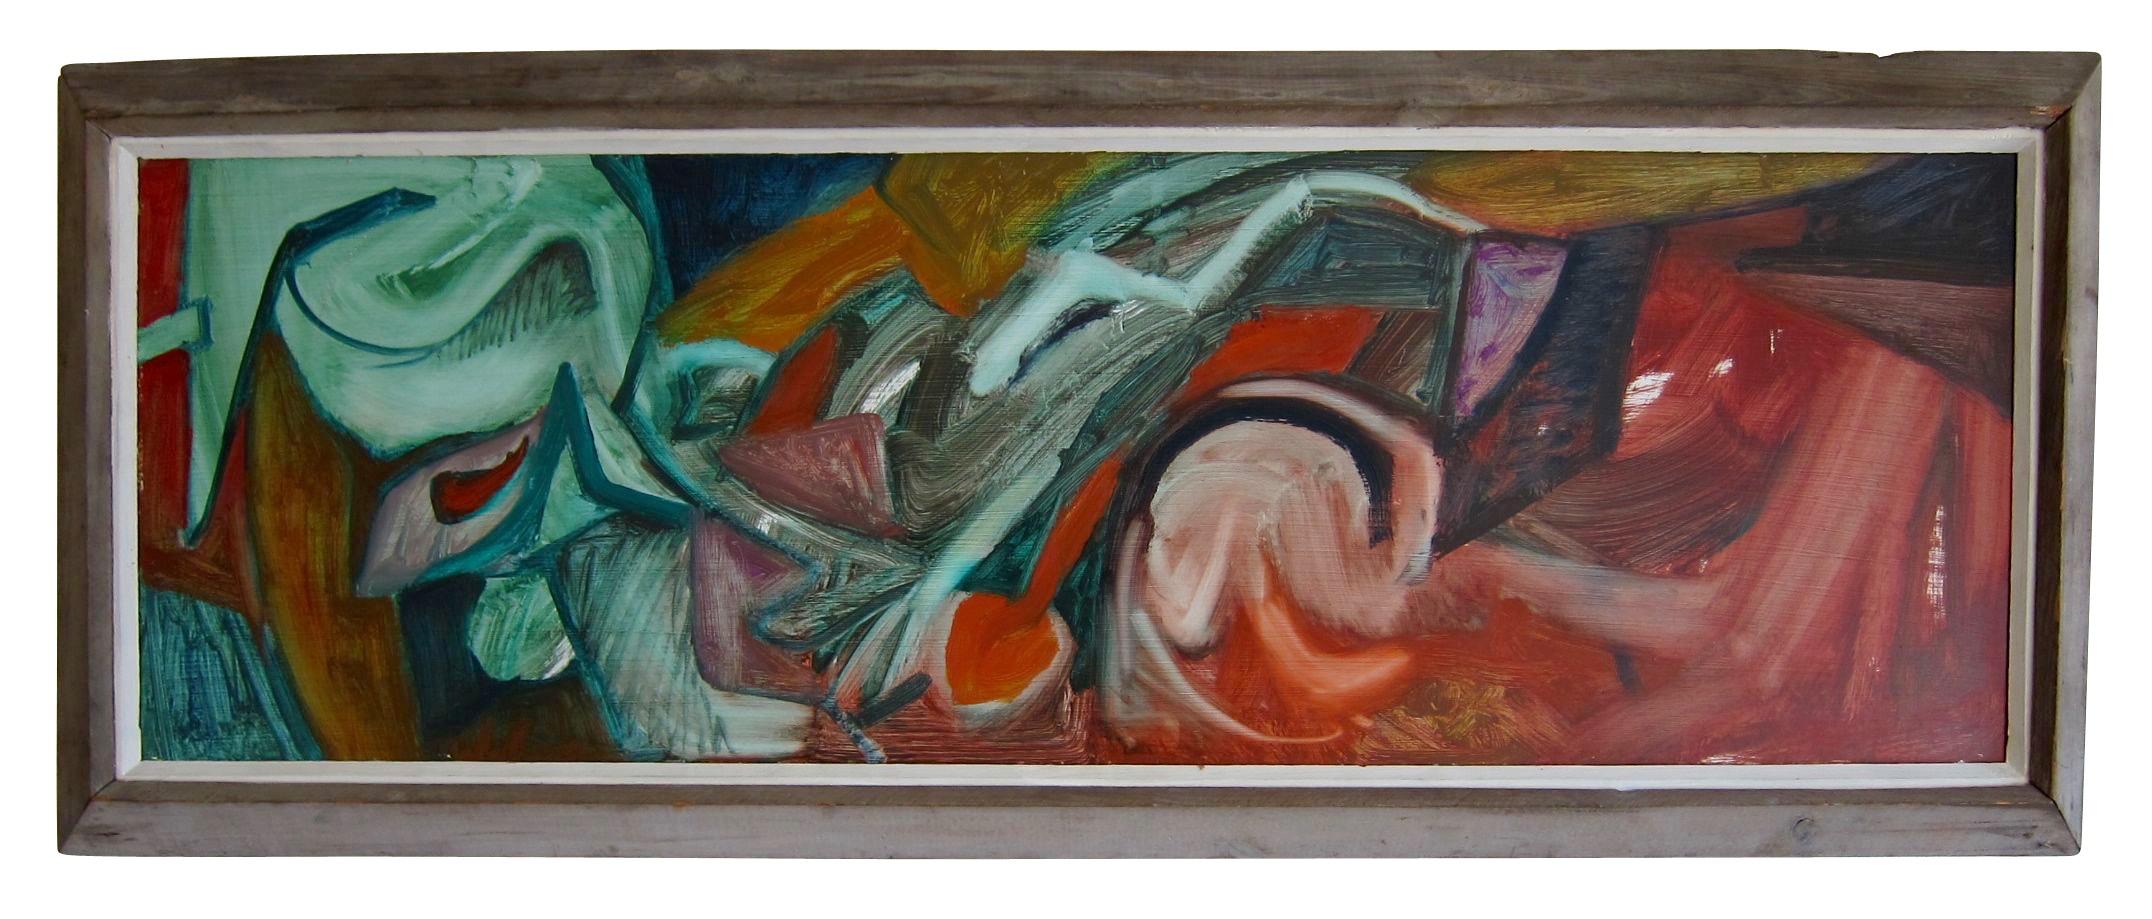 Abstract painting on masonite by St. Louis abstract artist John Wehmer.   This work is dates from the 1950s and is housed in a period custom frame made by fellow artist and friend Werner Drewes.  (Drewes name can be seen on the back of the frame -